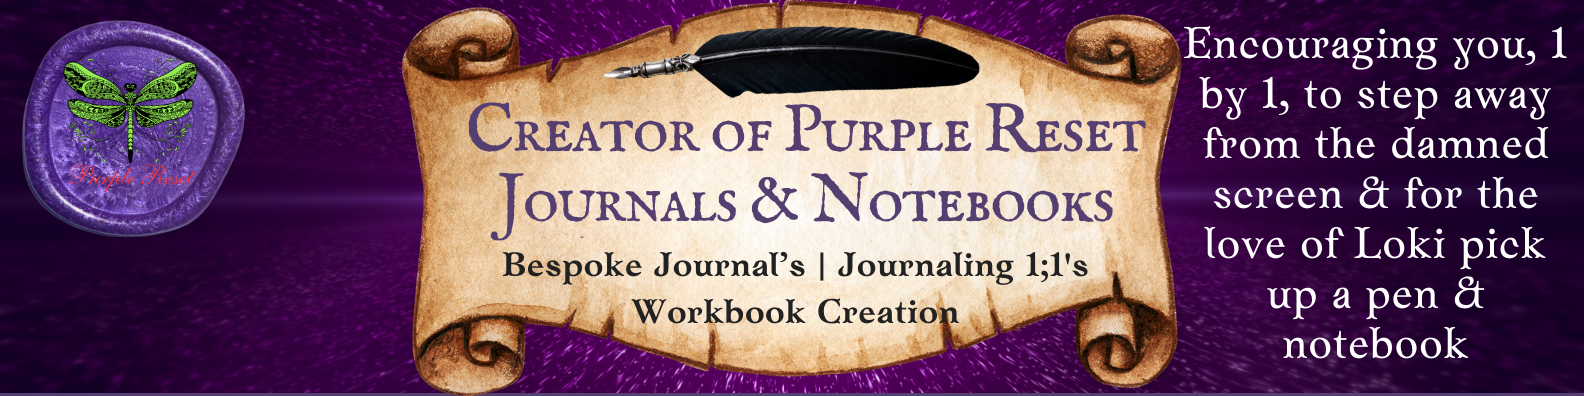 Hidden dangers of journaling – venting over the same old sh!t